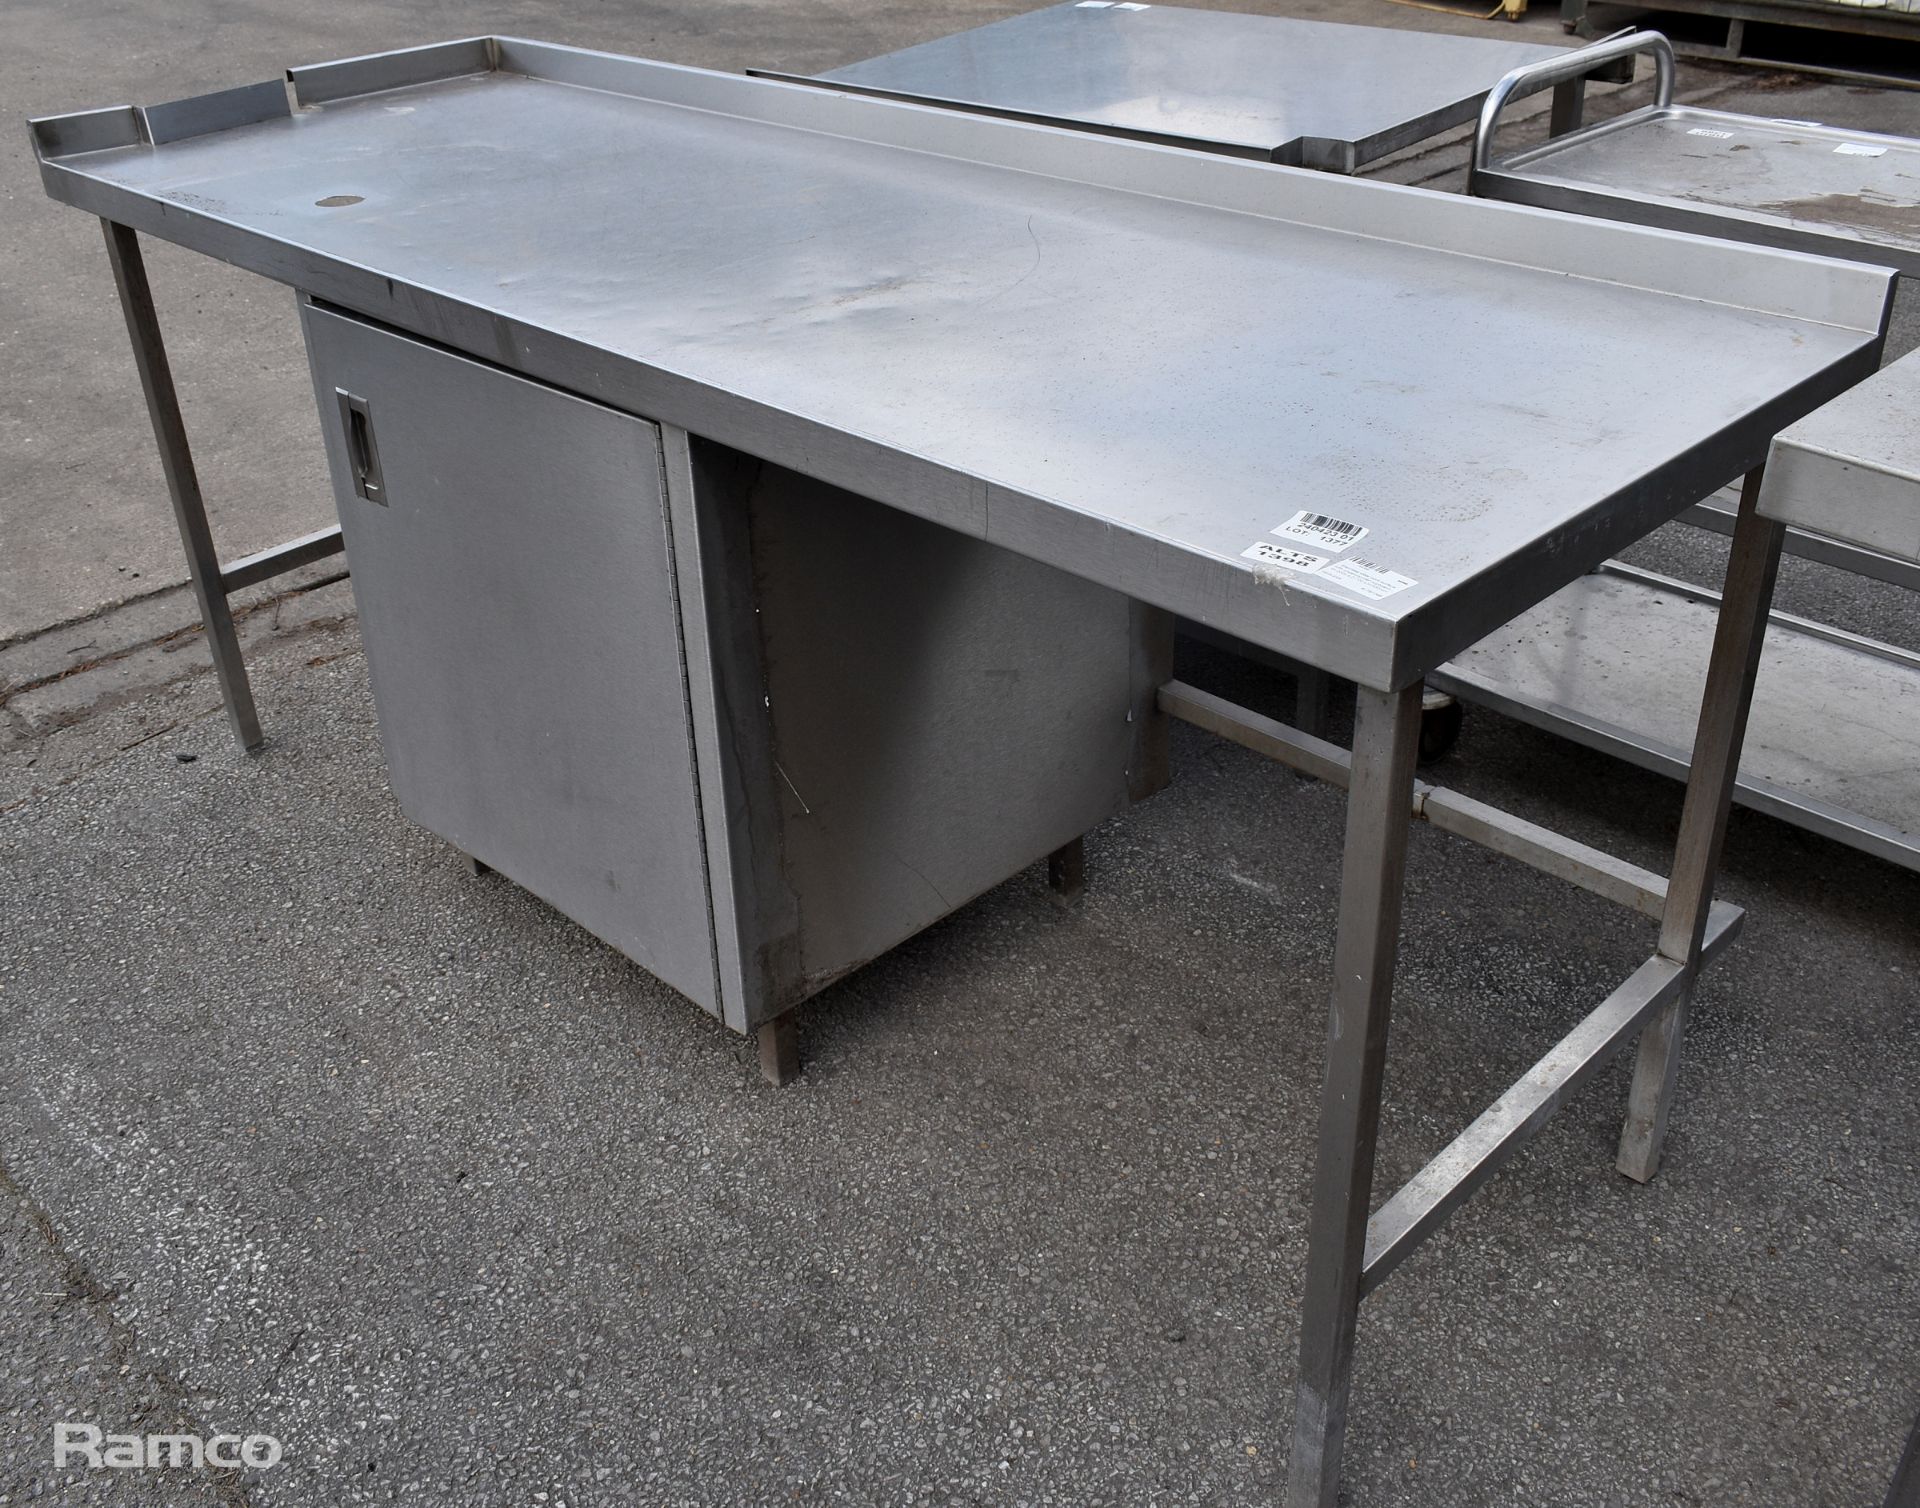 Stainless steel work surface with under counter cupboard - W 2000 x D 700 x H 830mm - Image 4 of 4